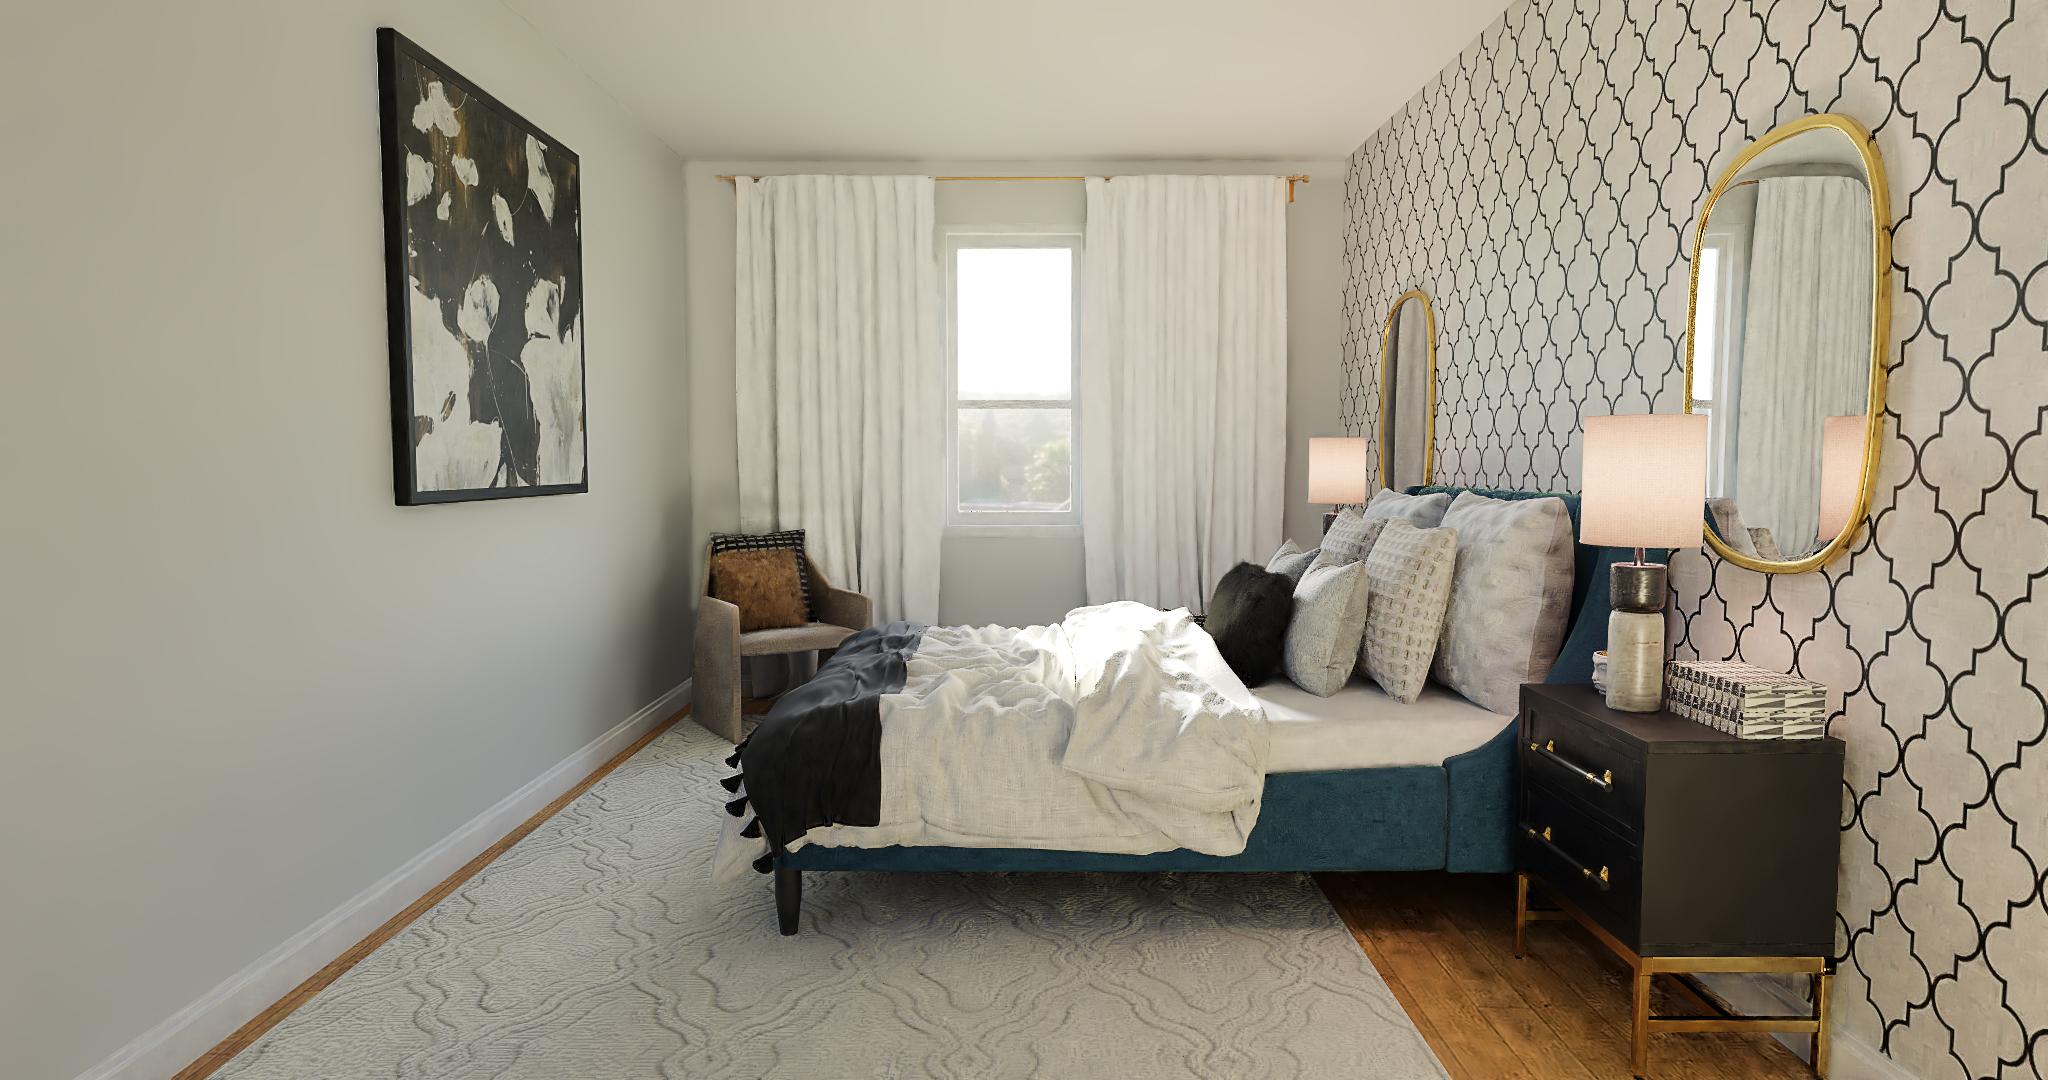 The Moroccan Accent Wall Makes Eyes Spin In This Chic Bedroom